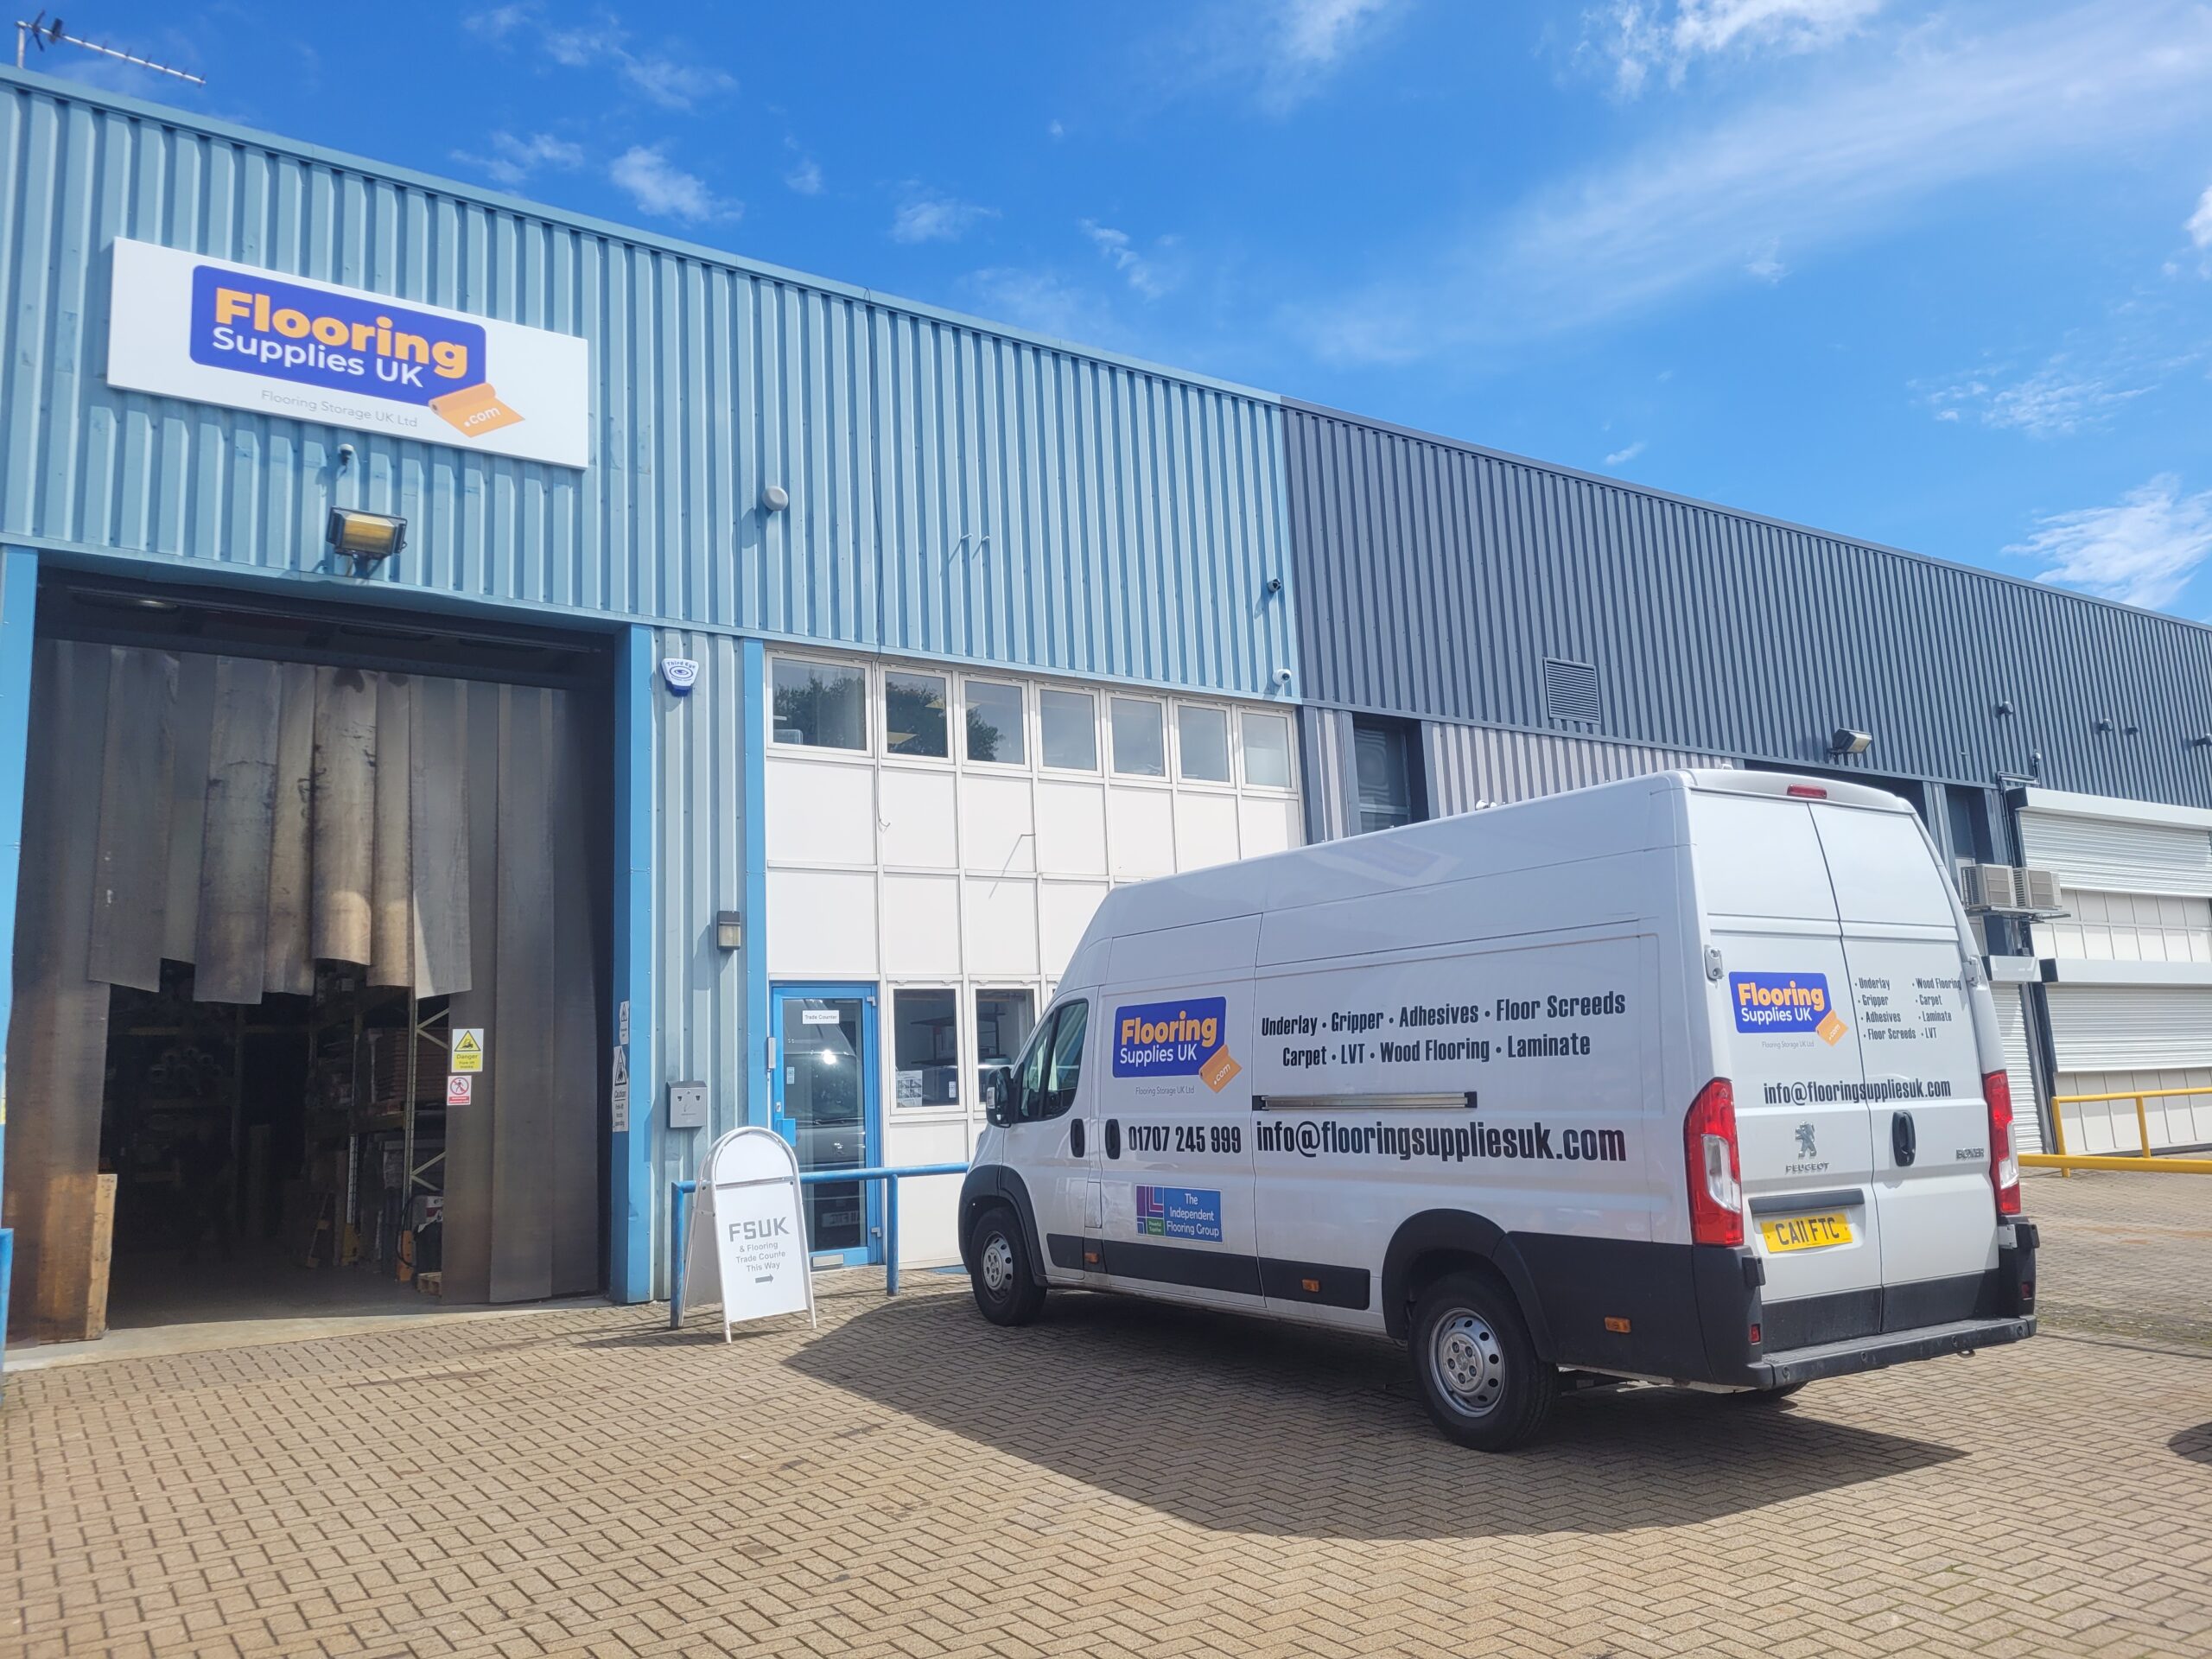 Image of the Outside of Flooring Supplies UK